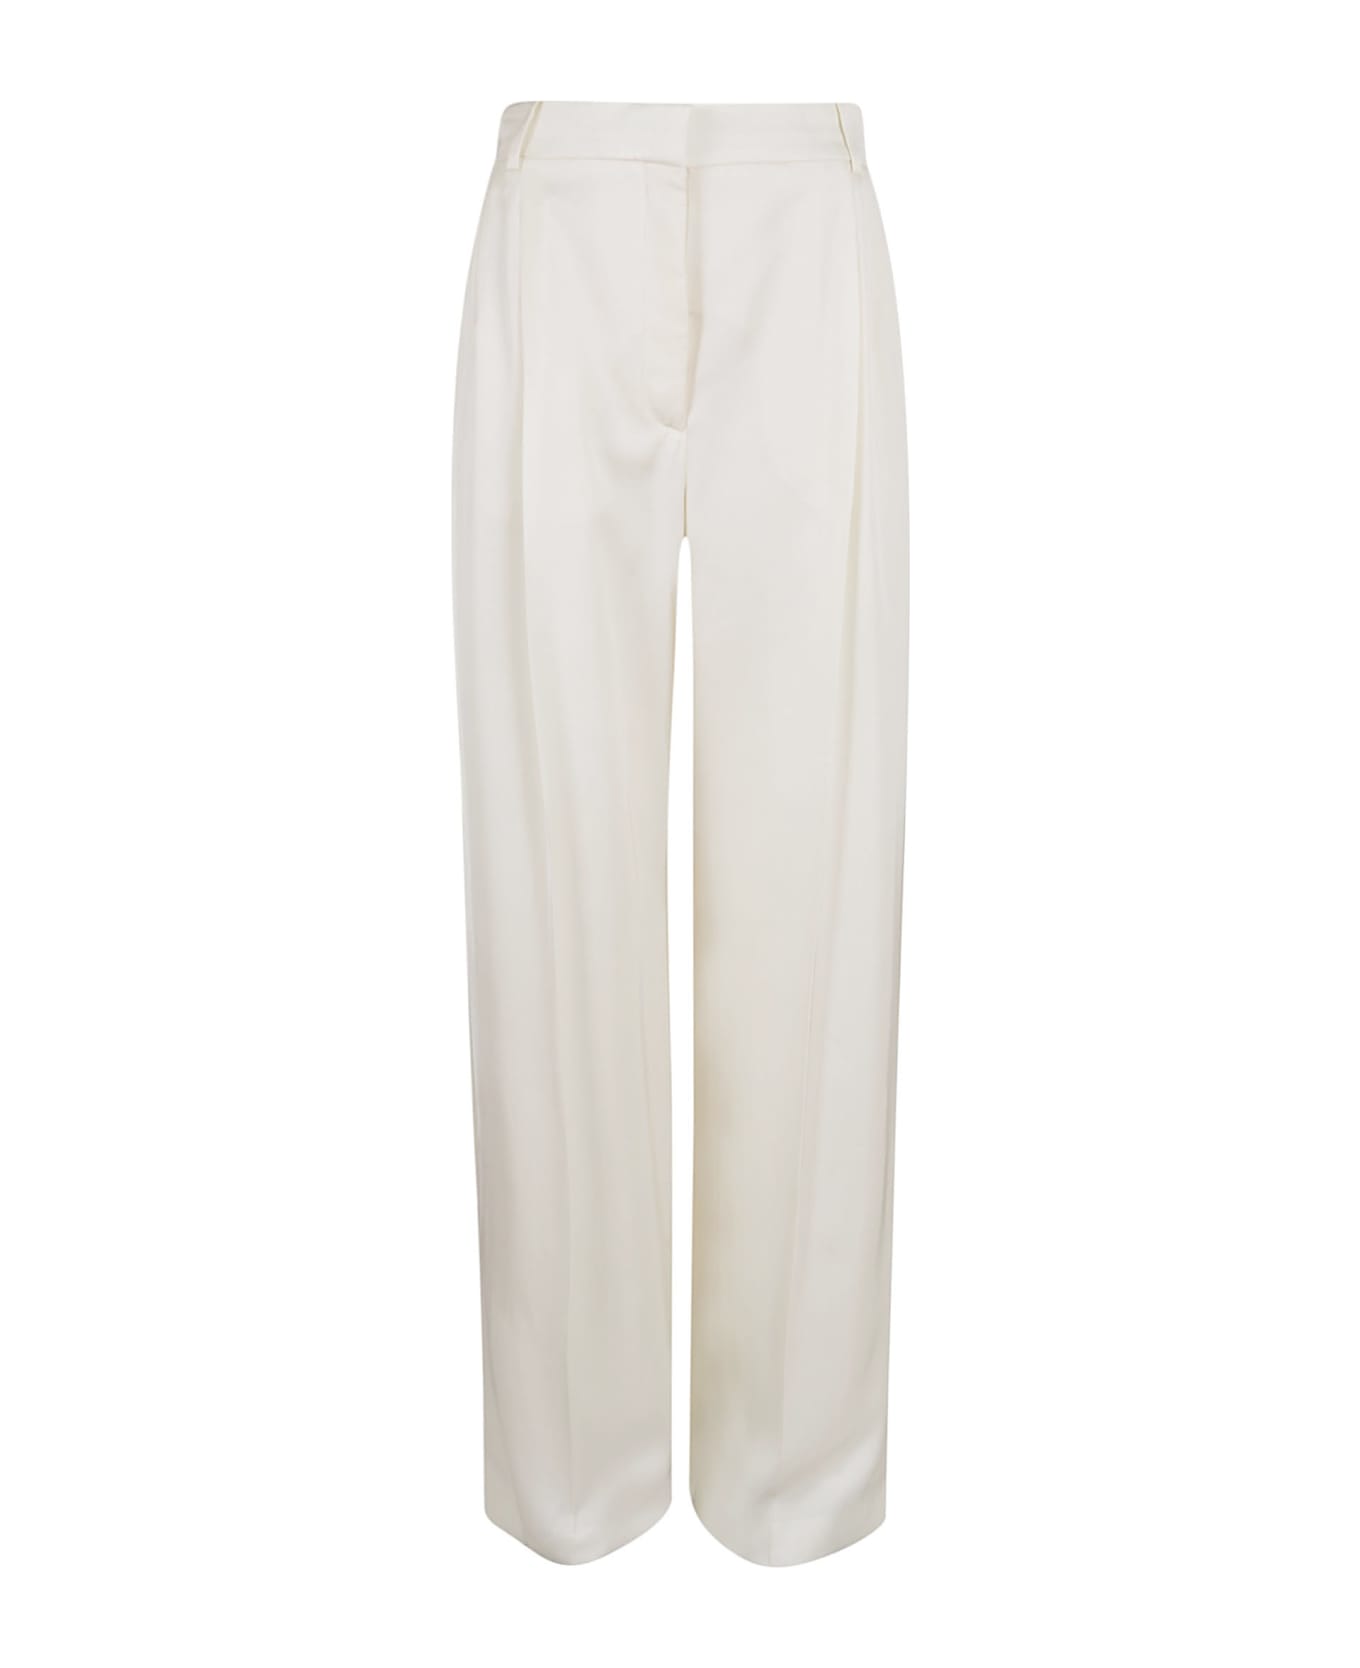 Alexander McQueen trousers Editions - Ivory